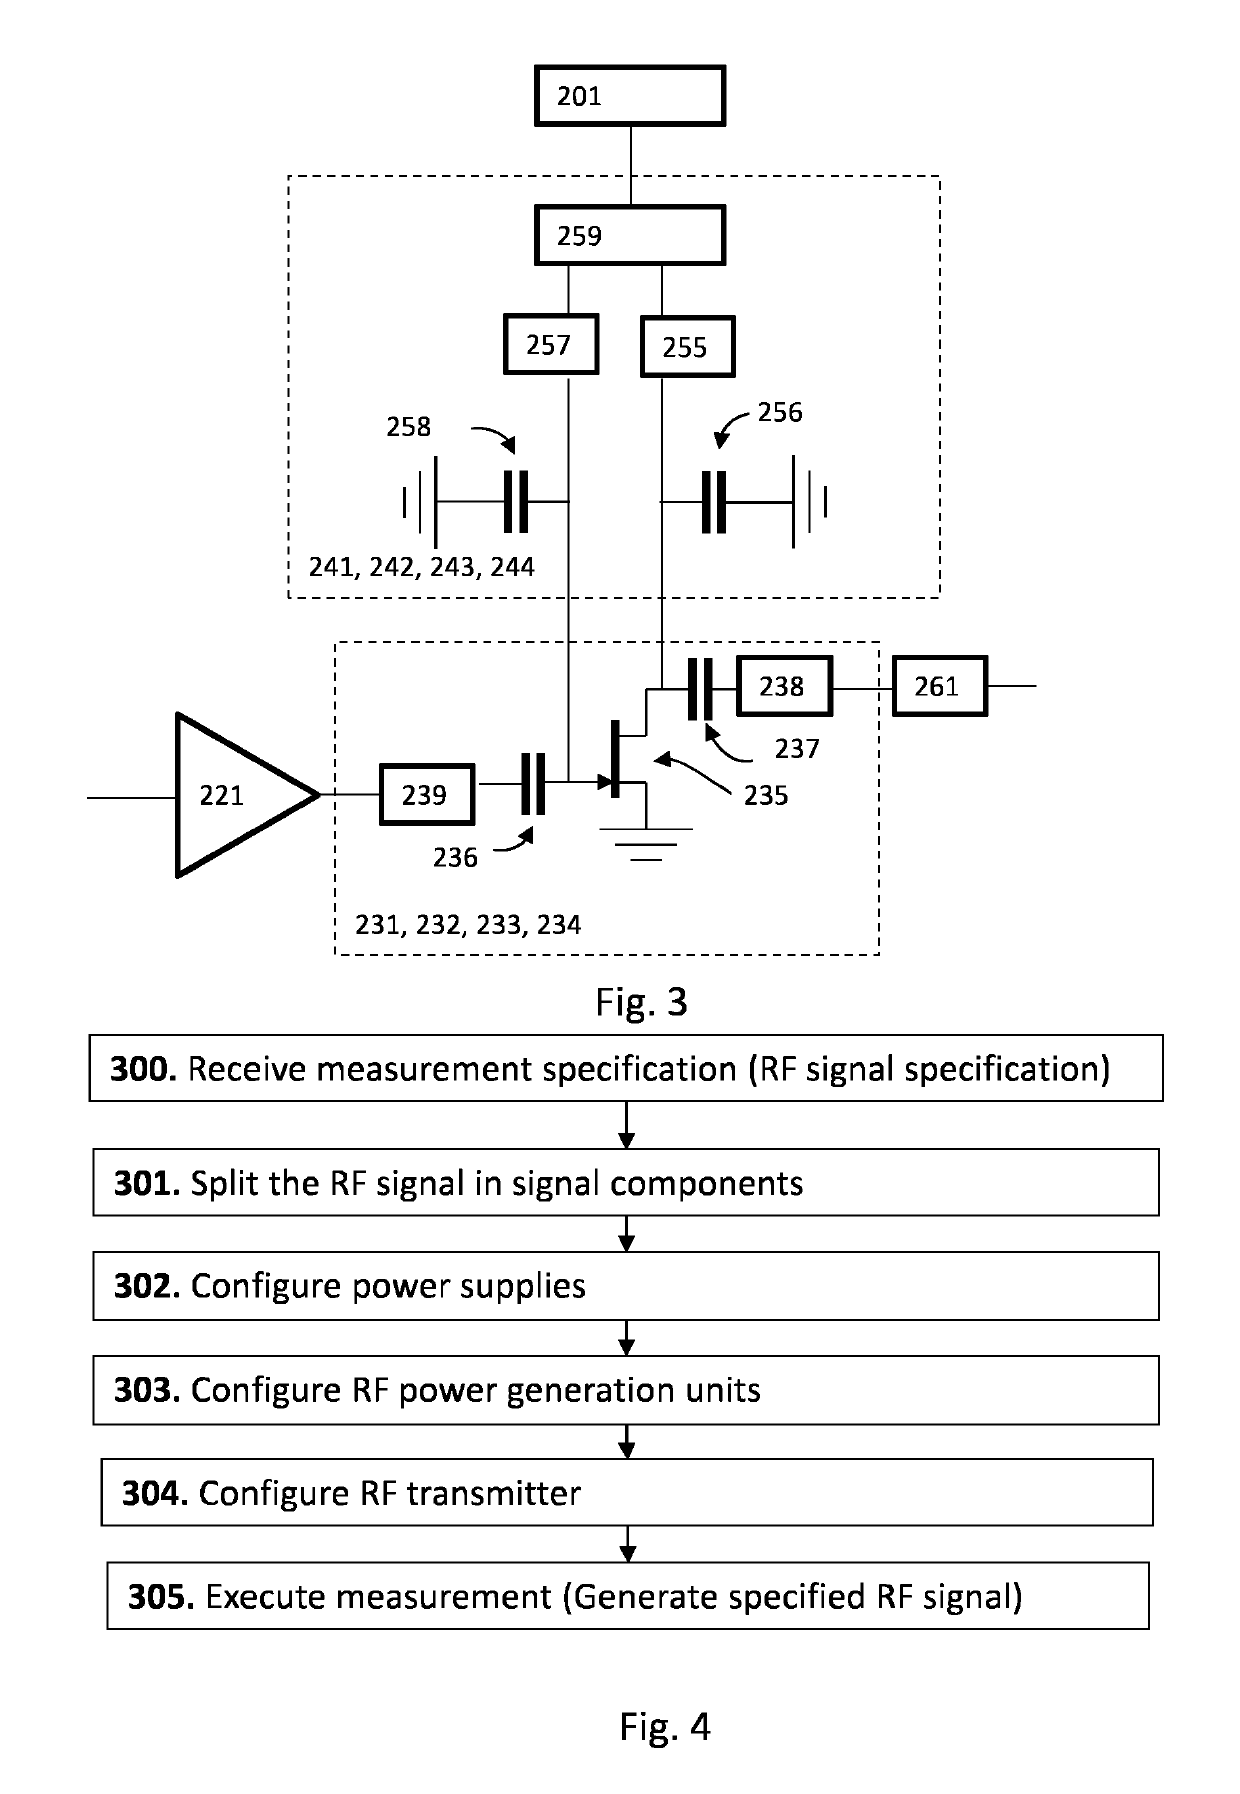 Generation of RF signals for excitation of nuclei in magnetic resonance systems